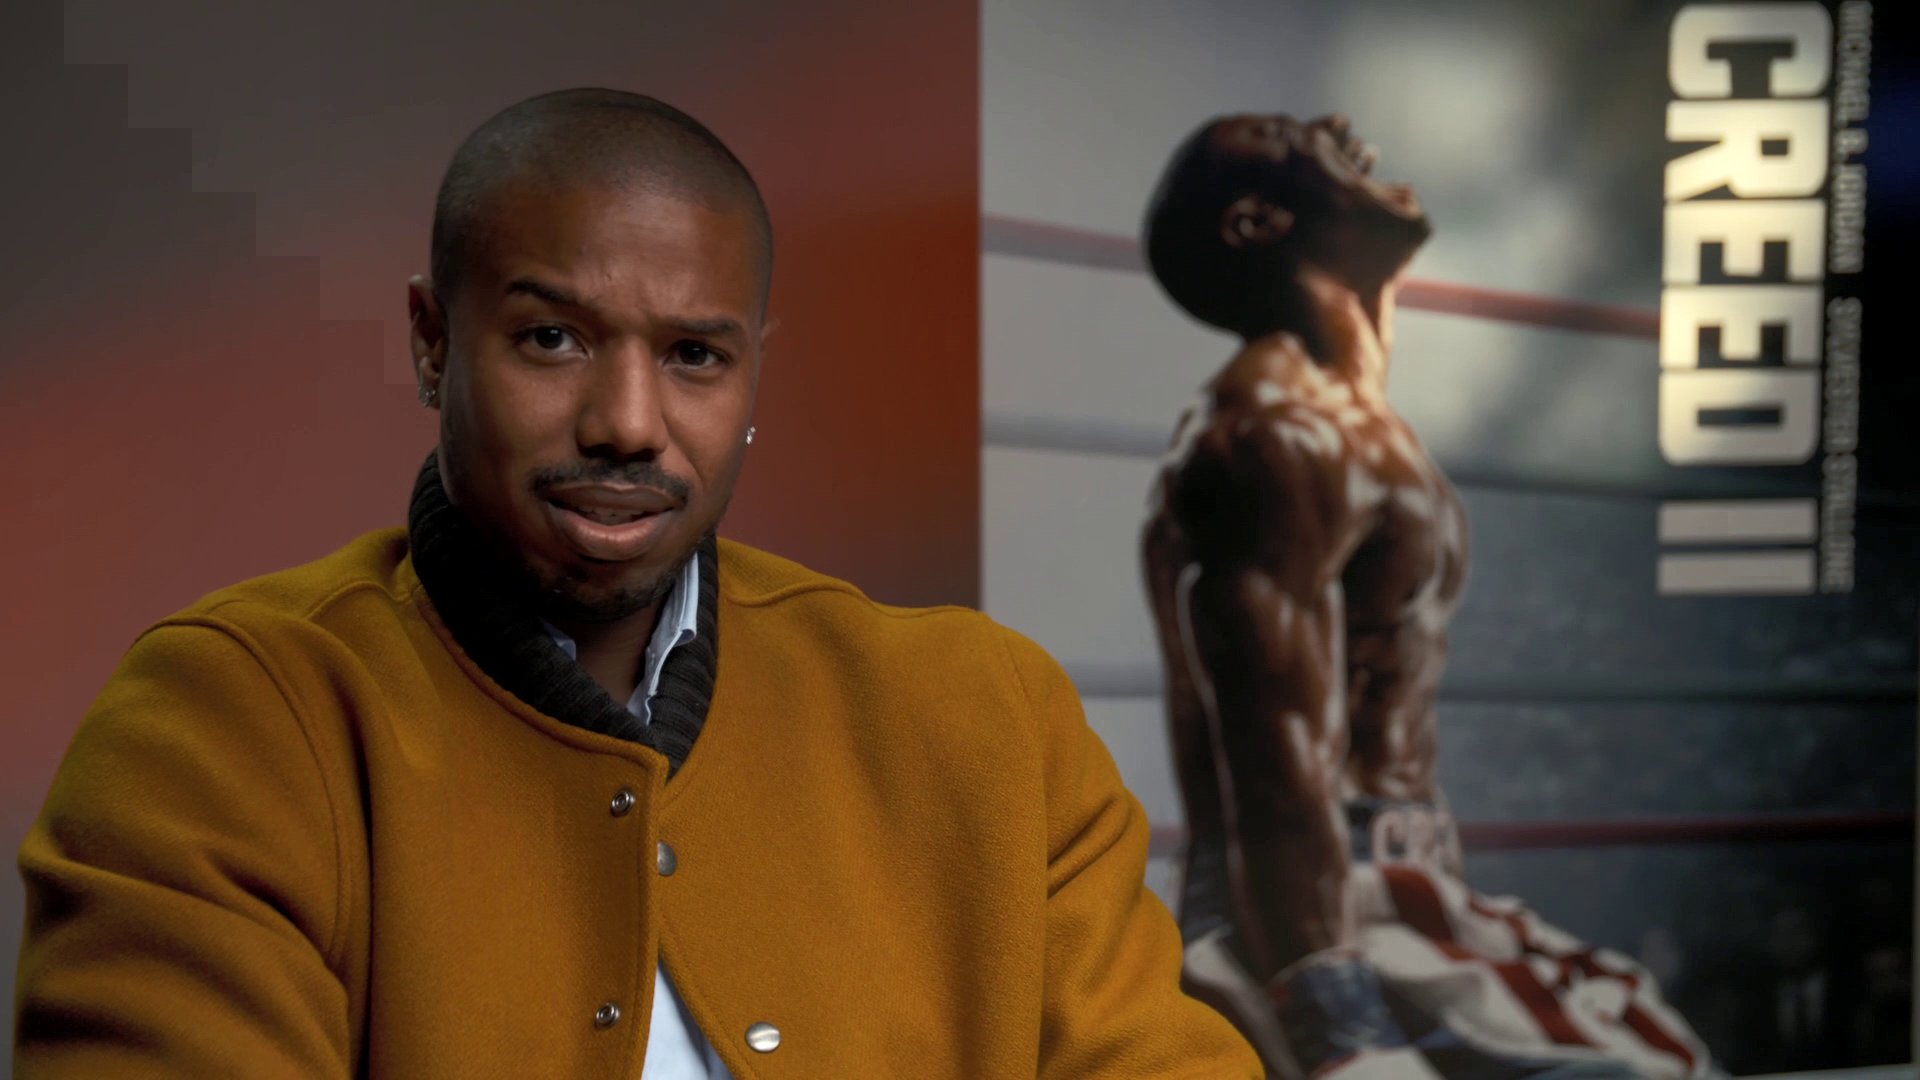 Michael B Jordan Wants You to Know How Much He Enjoys Anime